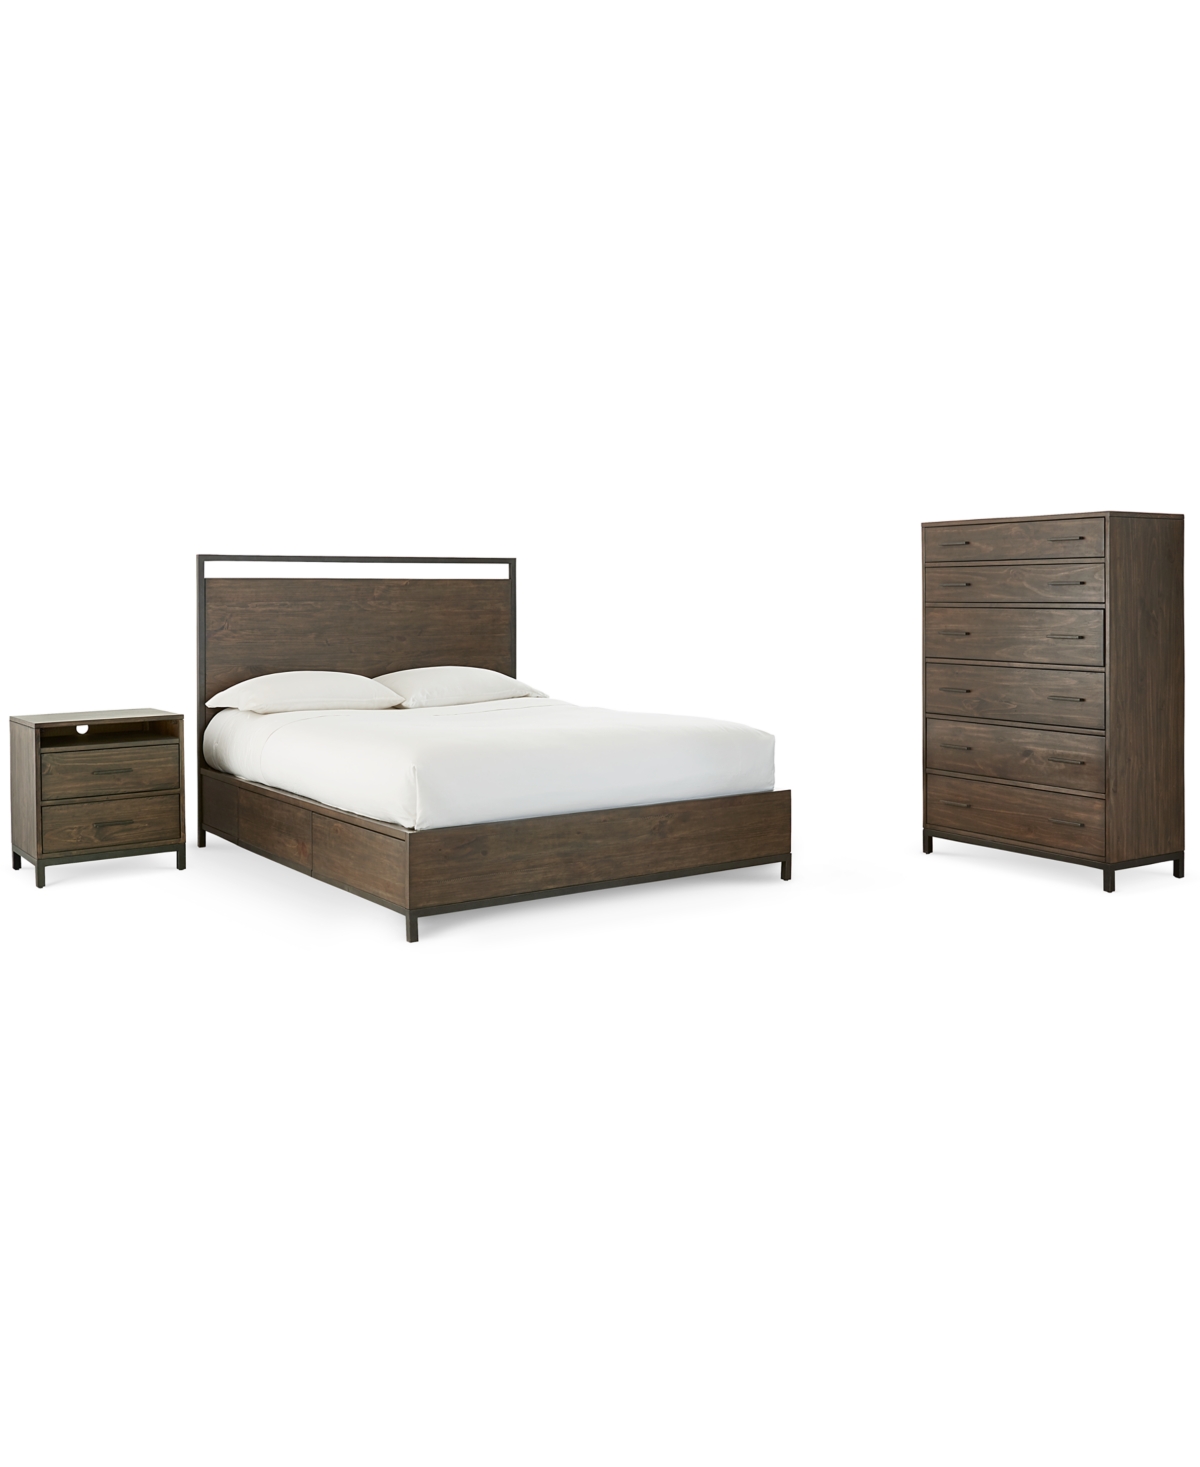 Furniture Gatlin 3-pc. Brown Bedroom Set, (california King Storage Bed, Nightstand & Chest), Created For Macy' In No Color